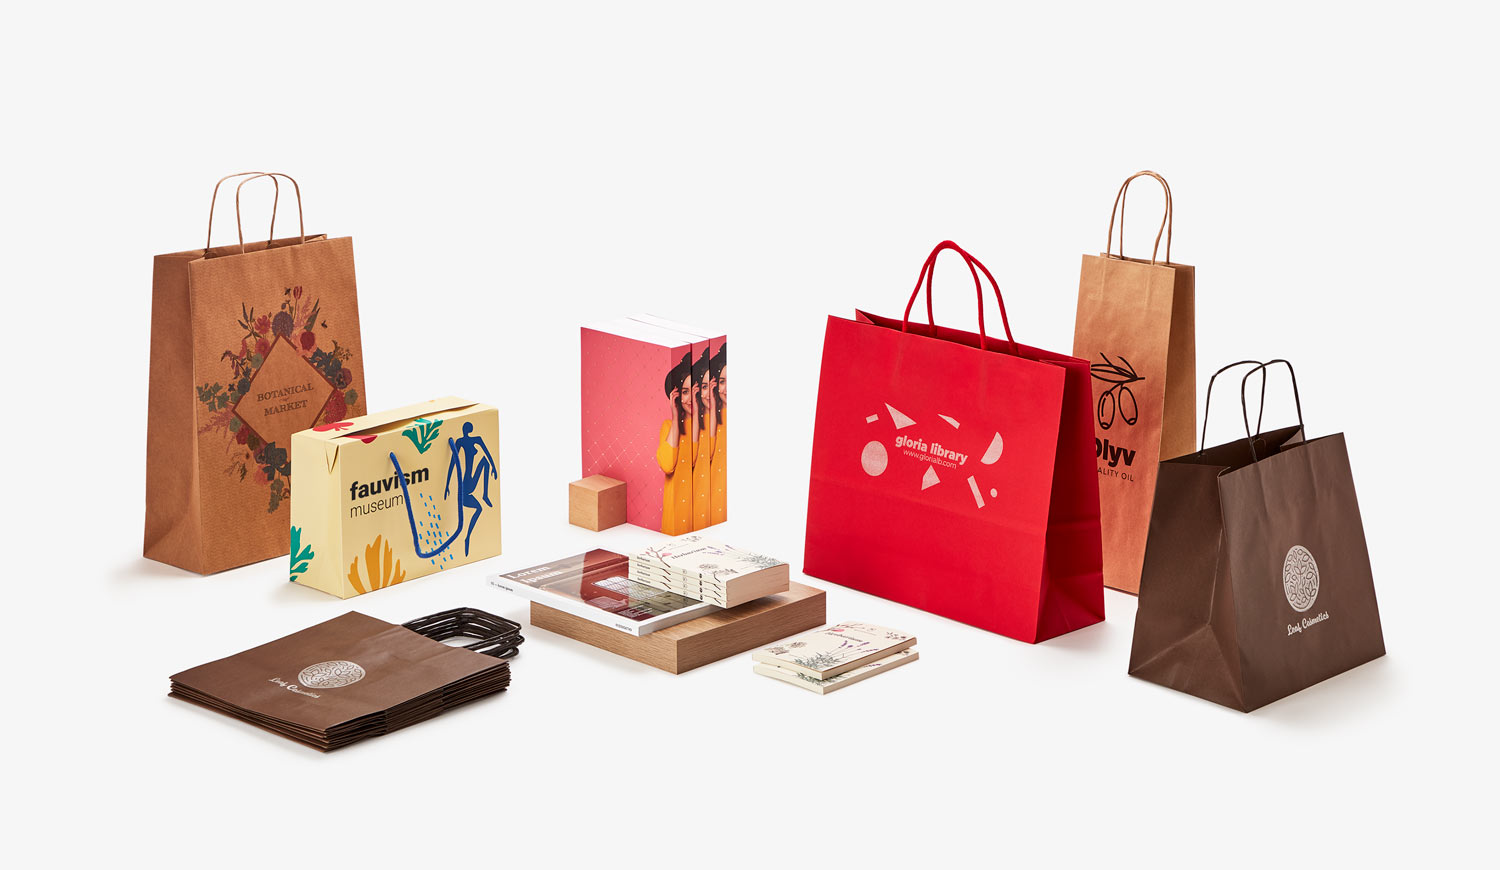 Custom brown print shopping paper bags with your own logo